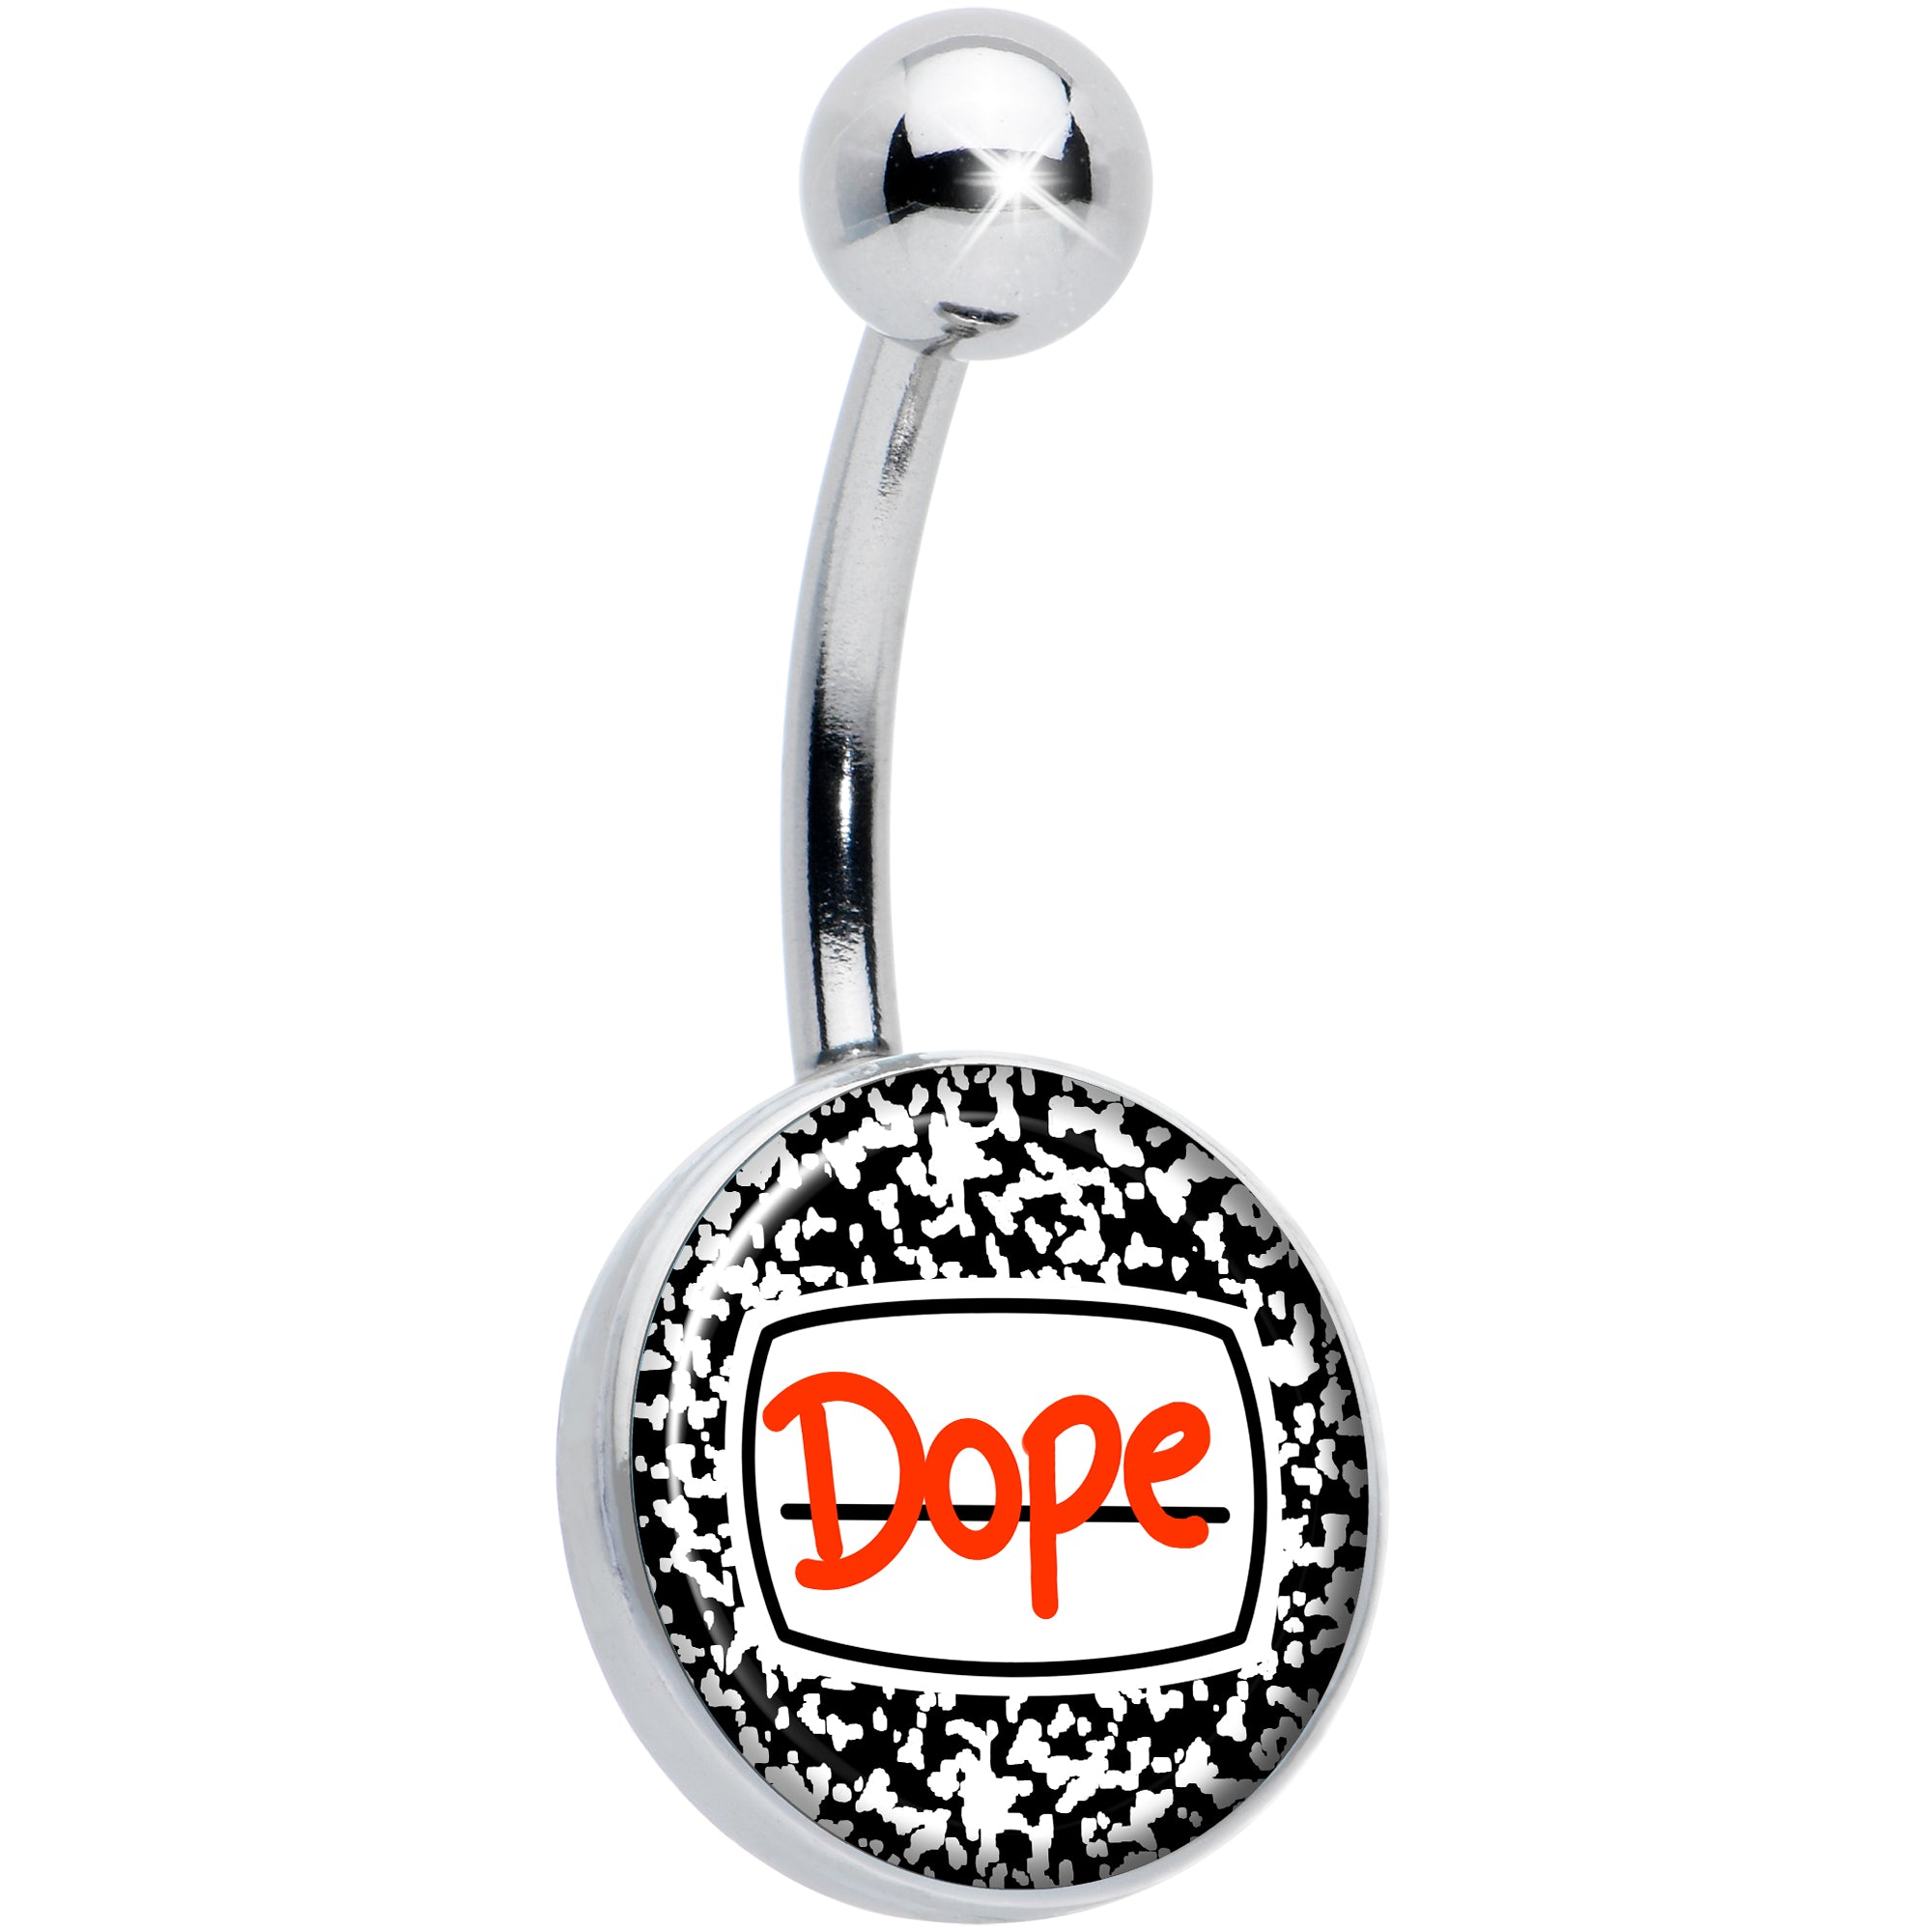 Dope Composition Notebook Belly Ring